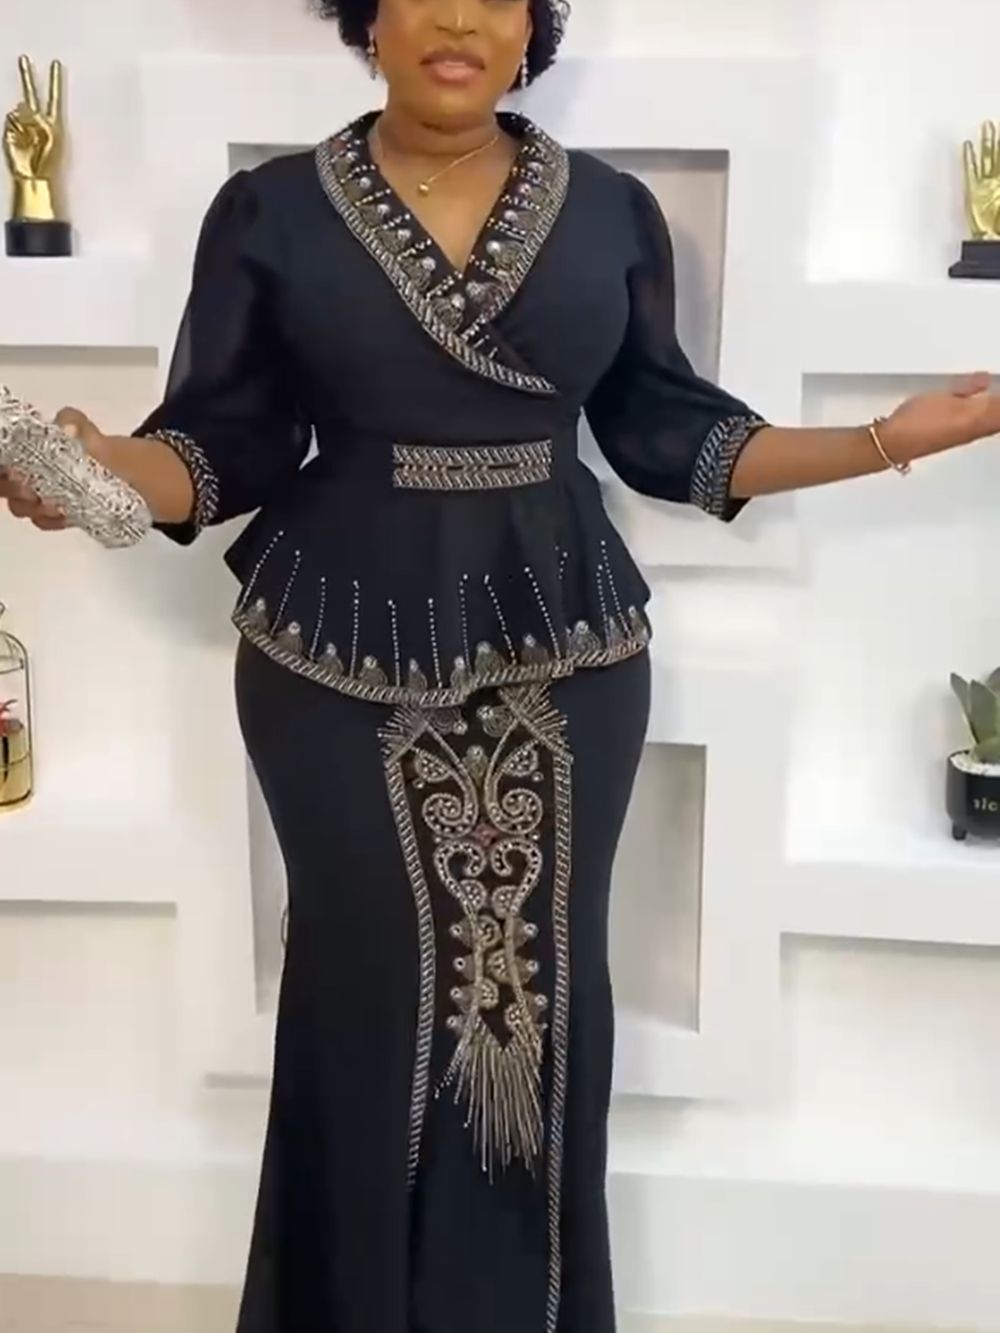 Effortlessly Chic: 2 Piece Dashiki African Skirt and Top Set for Women, Perfect for Weddings and Parties - Flexi Africa - Flexi Africa offers Free Delivery Worldwide - Vibrant African traditional clothing showcasing bold prints and intricate designs